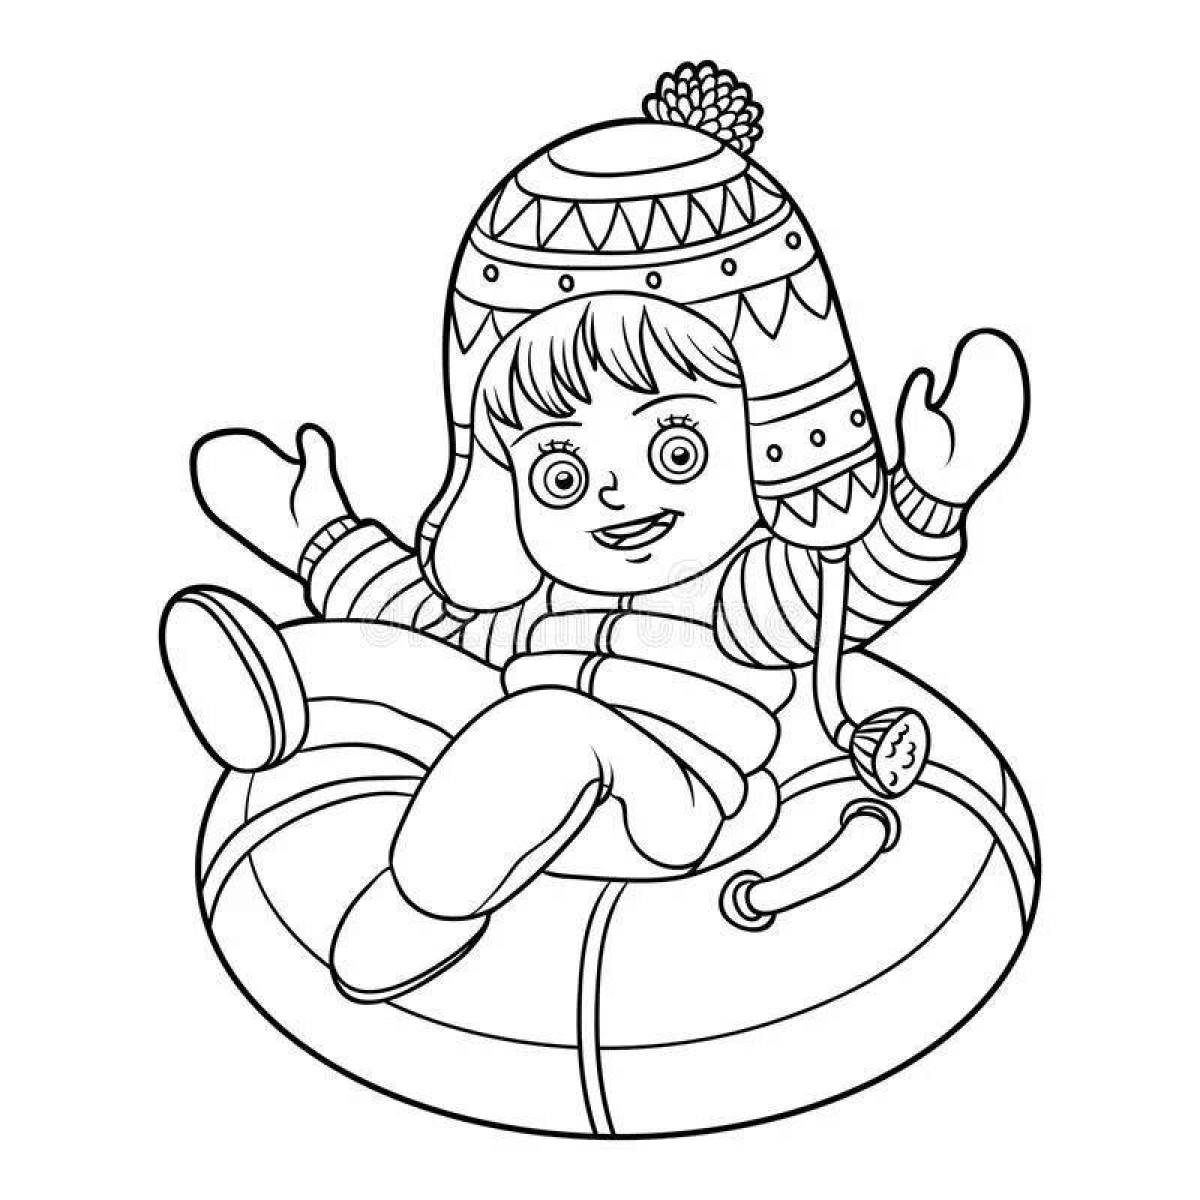 Sky cheesecake coloring page